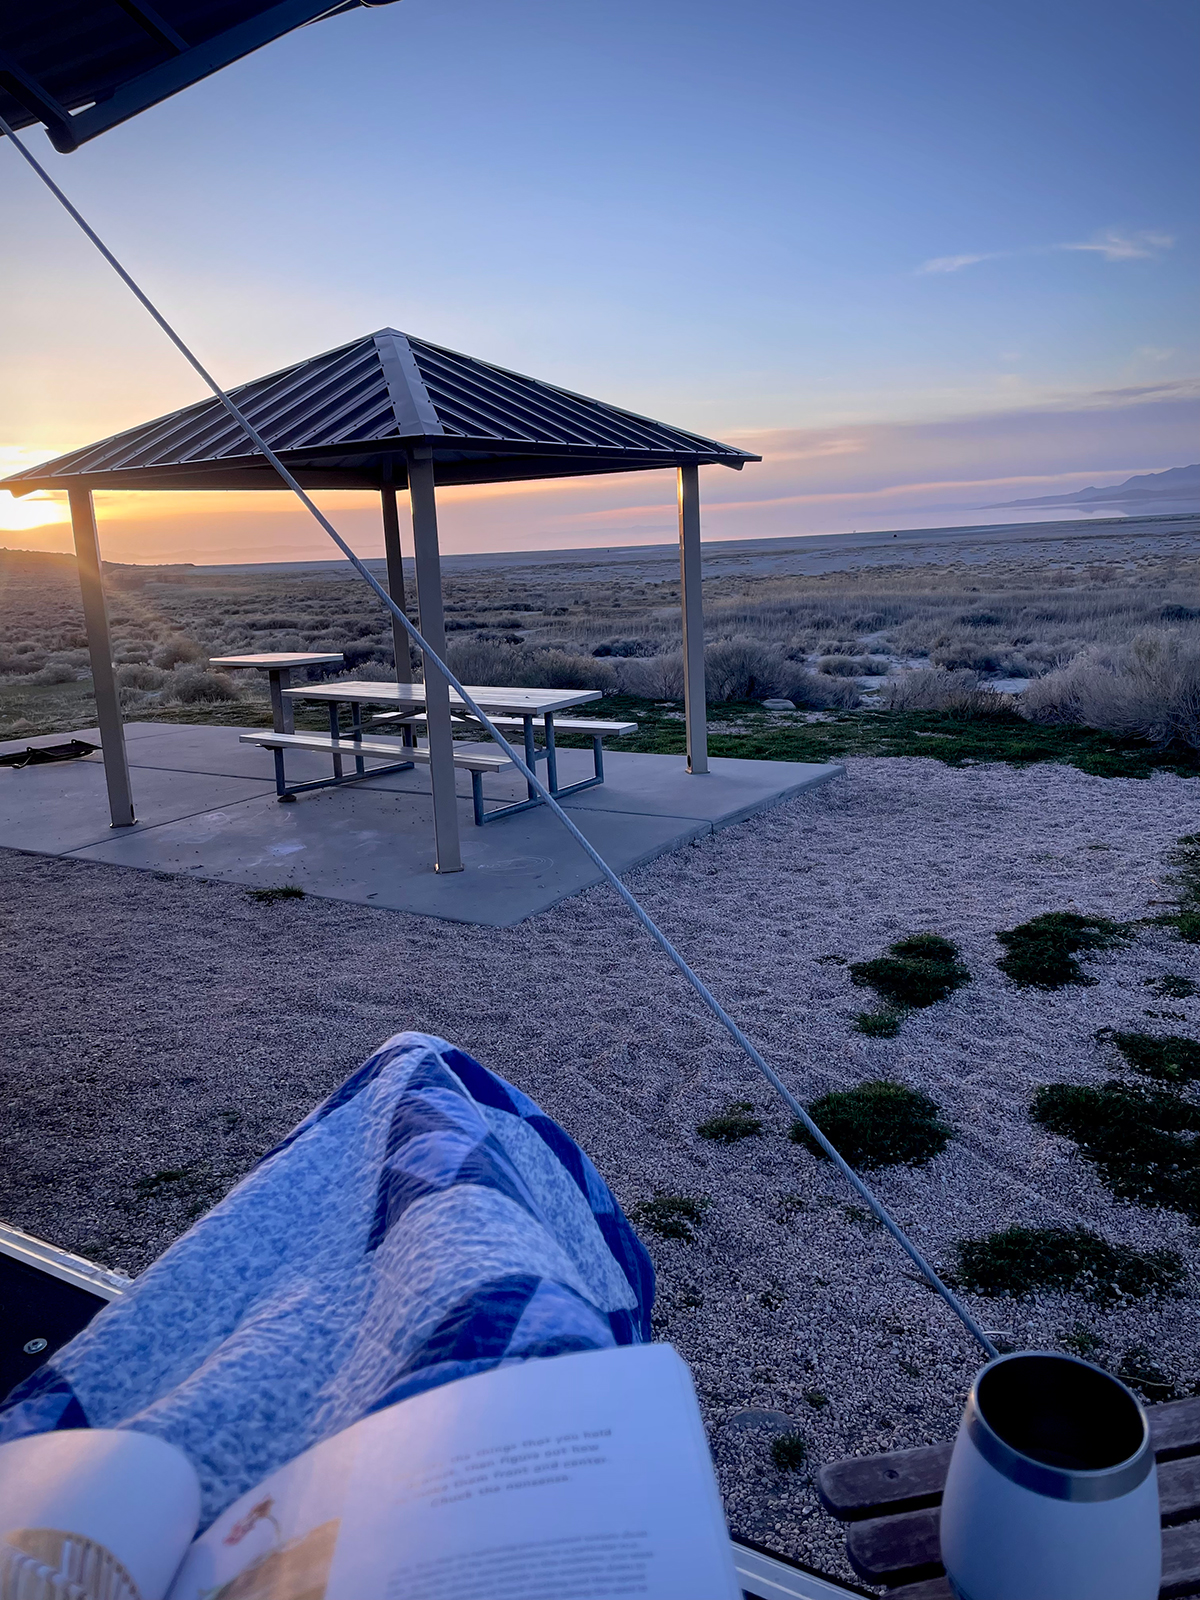 Watching the sunset from the back deck of our RV on Antelope Island.